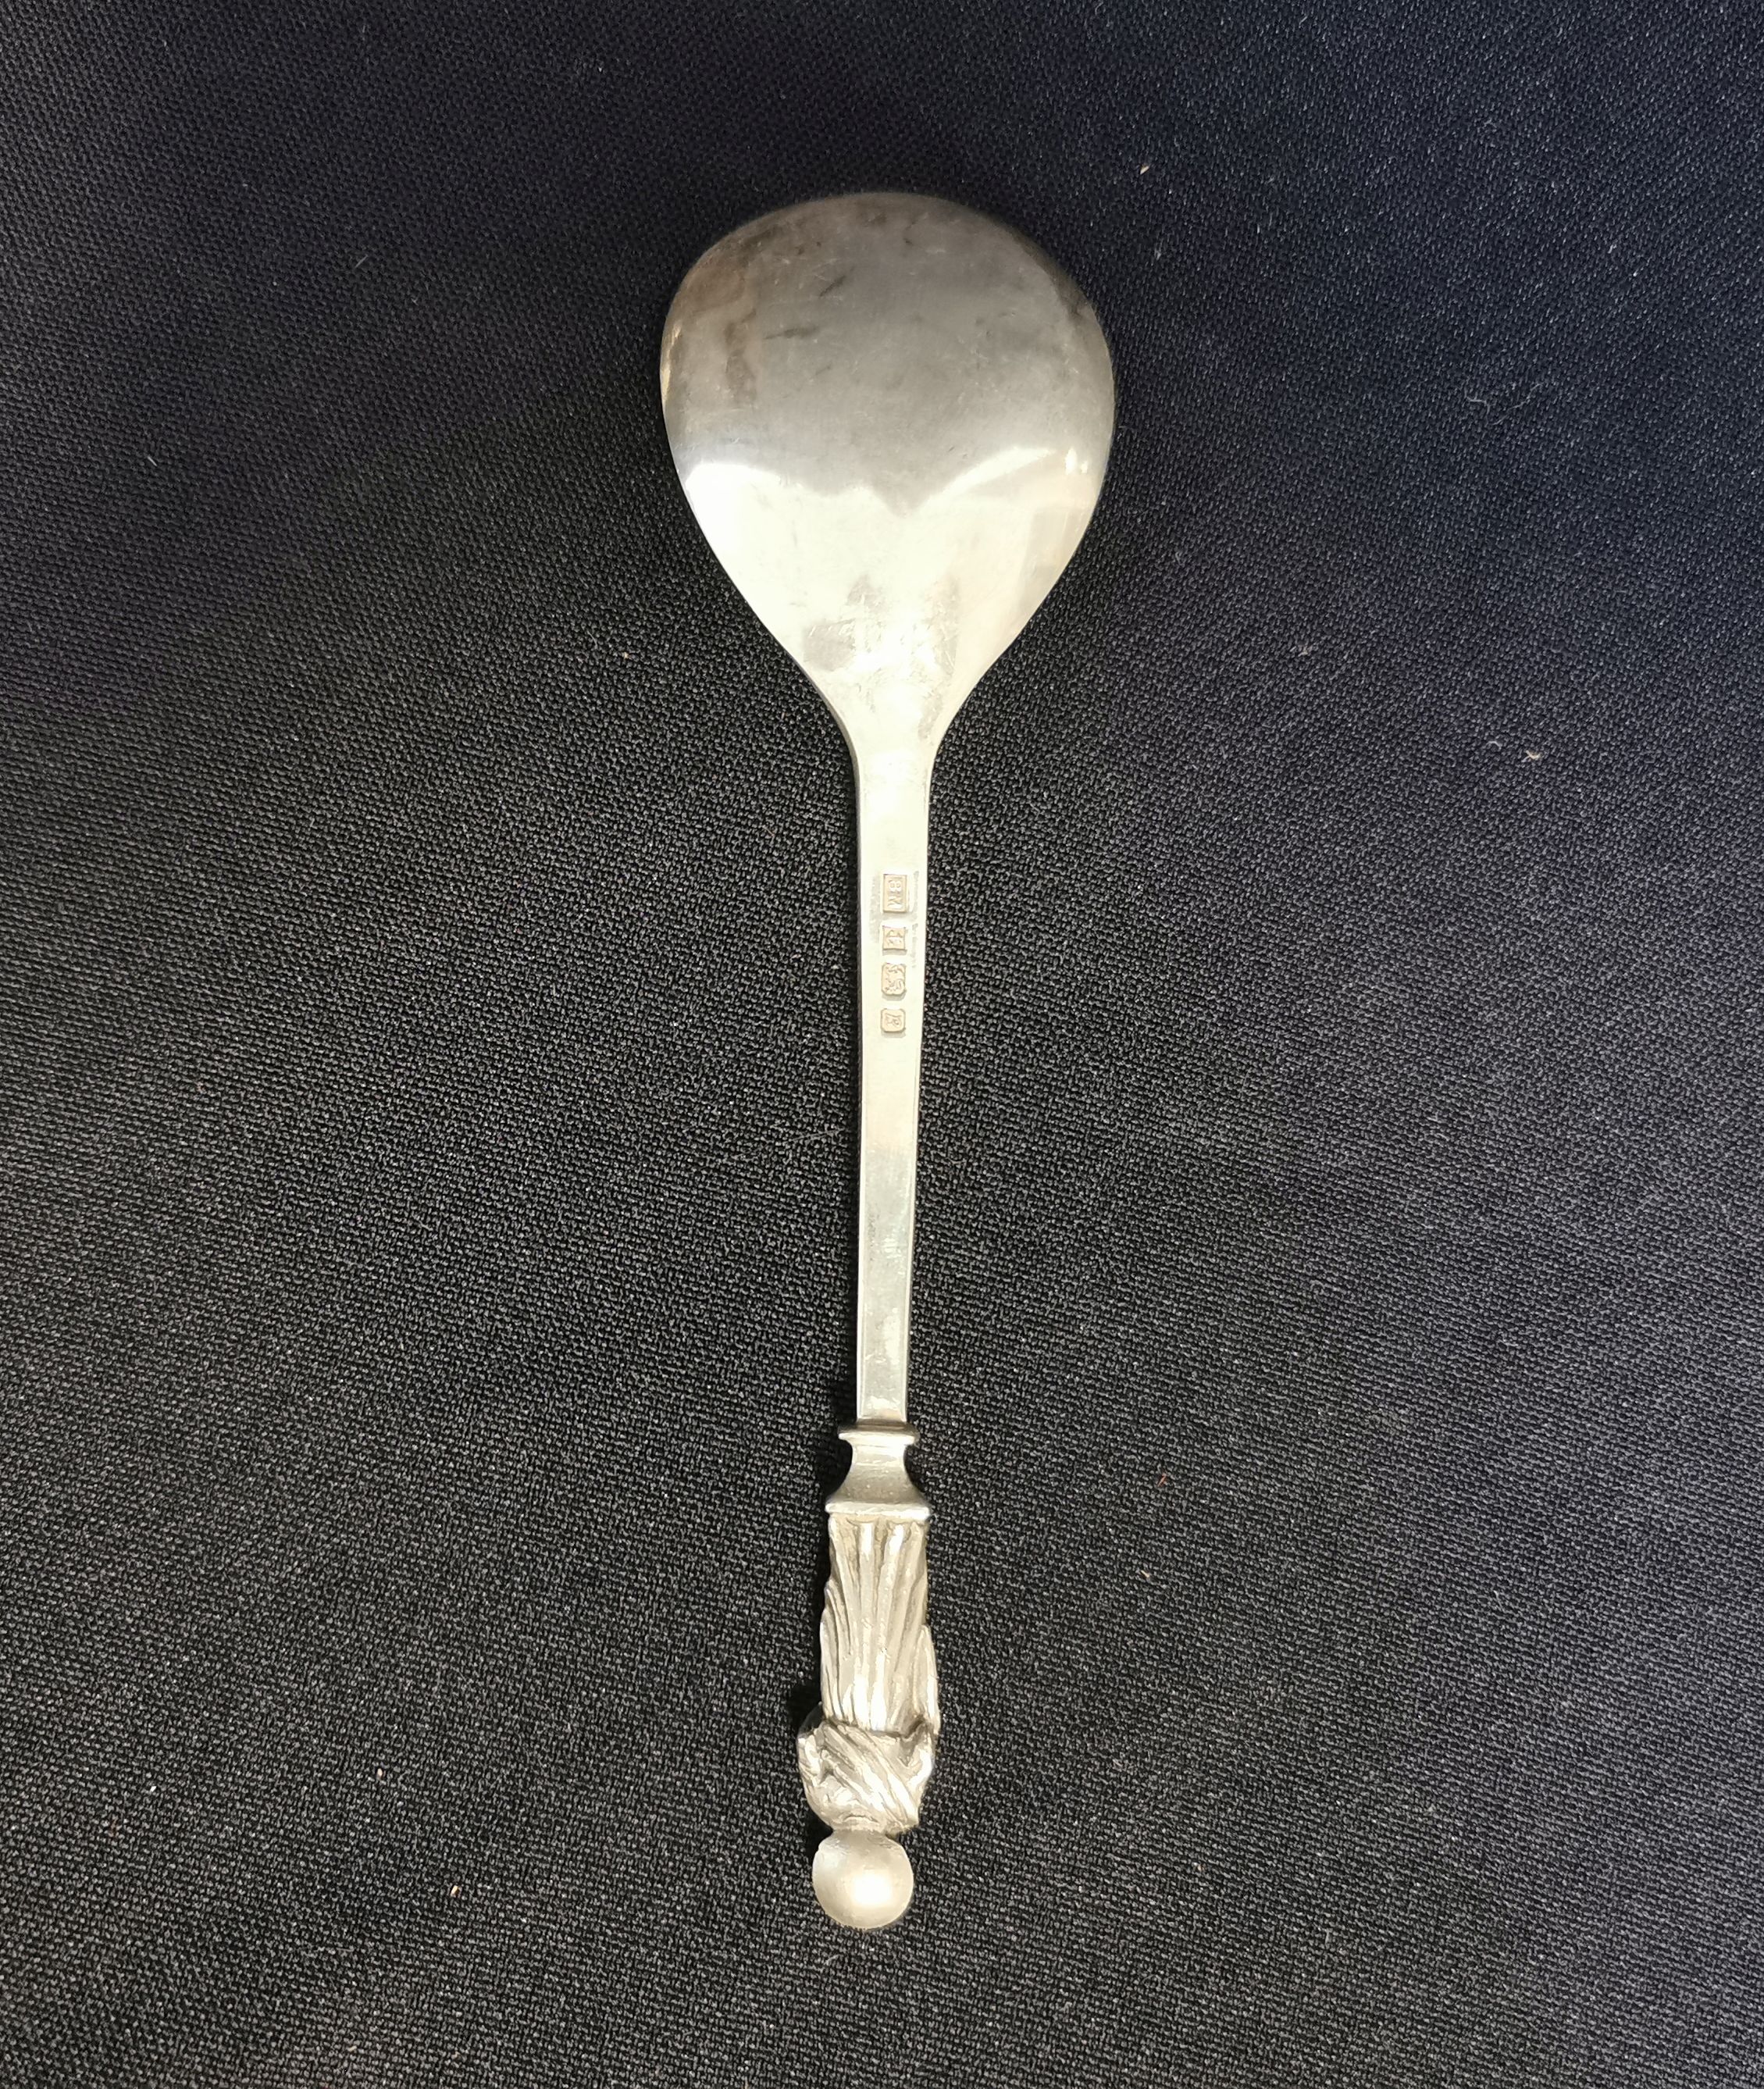 COLLECTION OF APOSTLE SPOONS - 13 PIECES  - Image 4 of 5